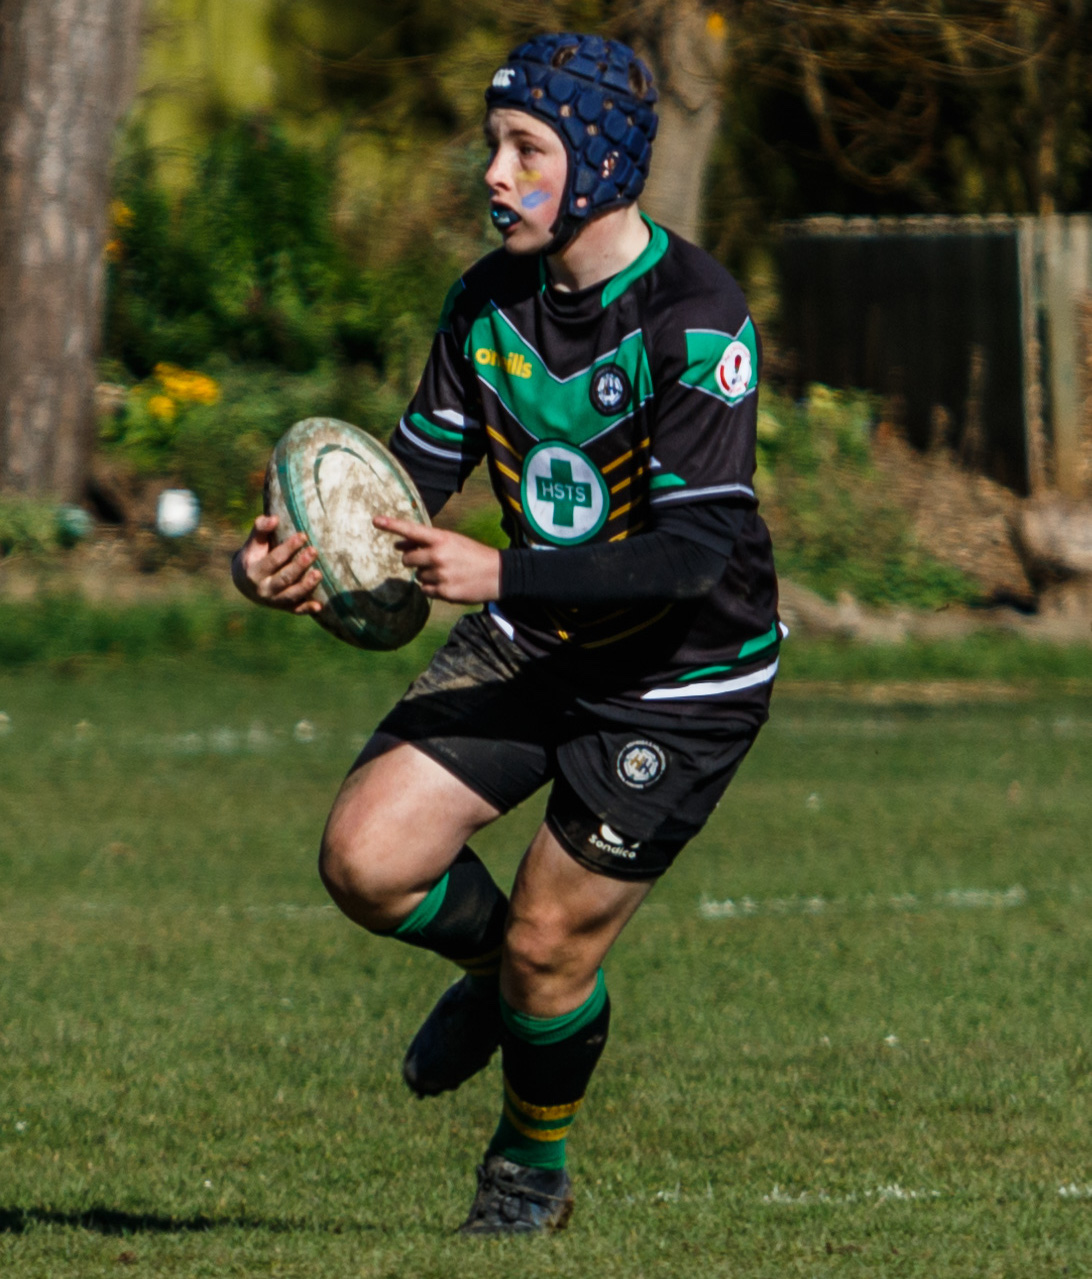 A boy on a rugby pitch holding a rugby ball